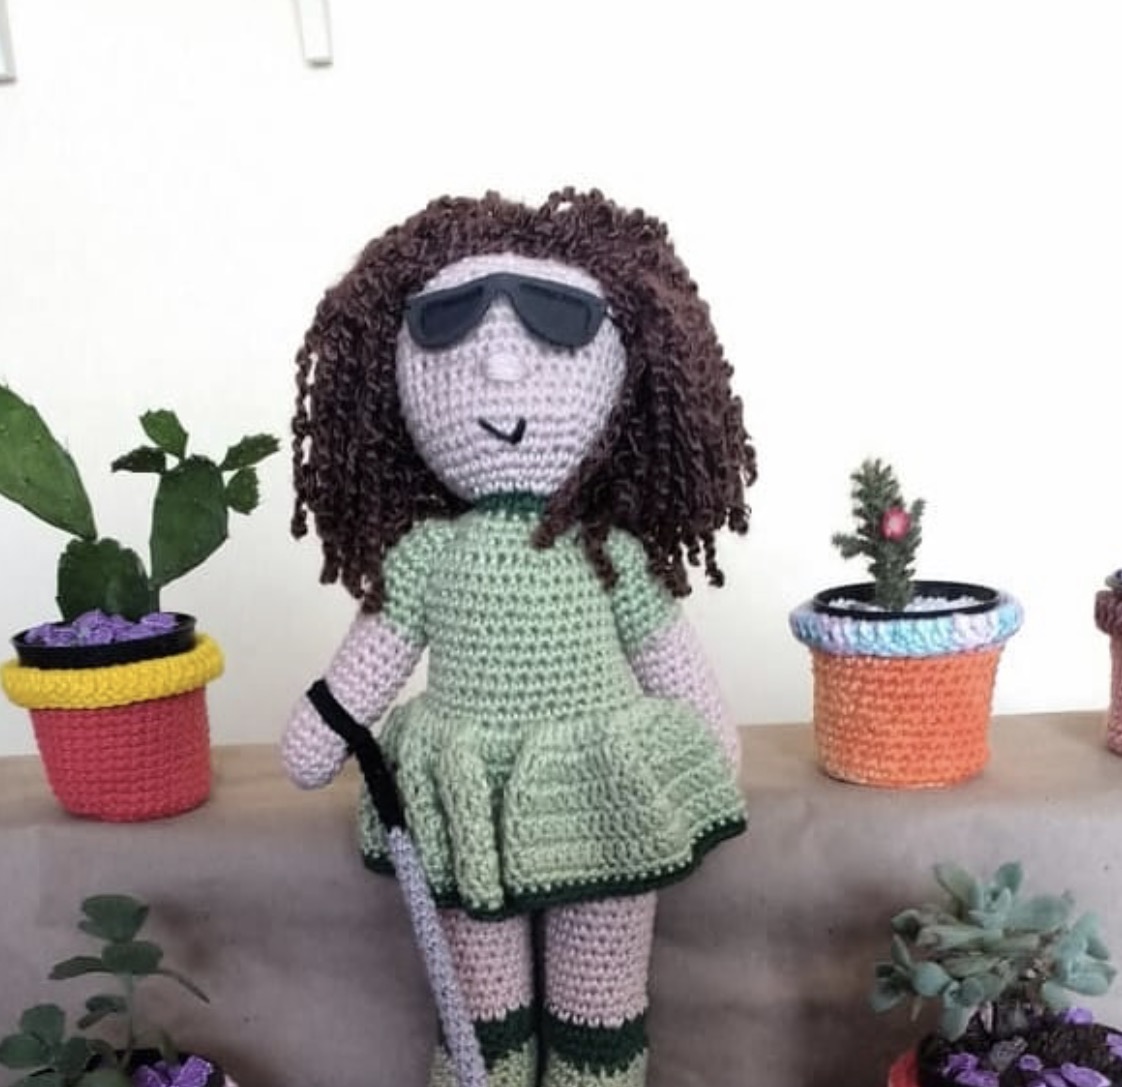 This cuddly companion with curly locks comes complete with cane and dark glasses, just like her new owner.